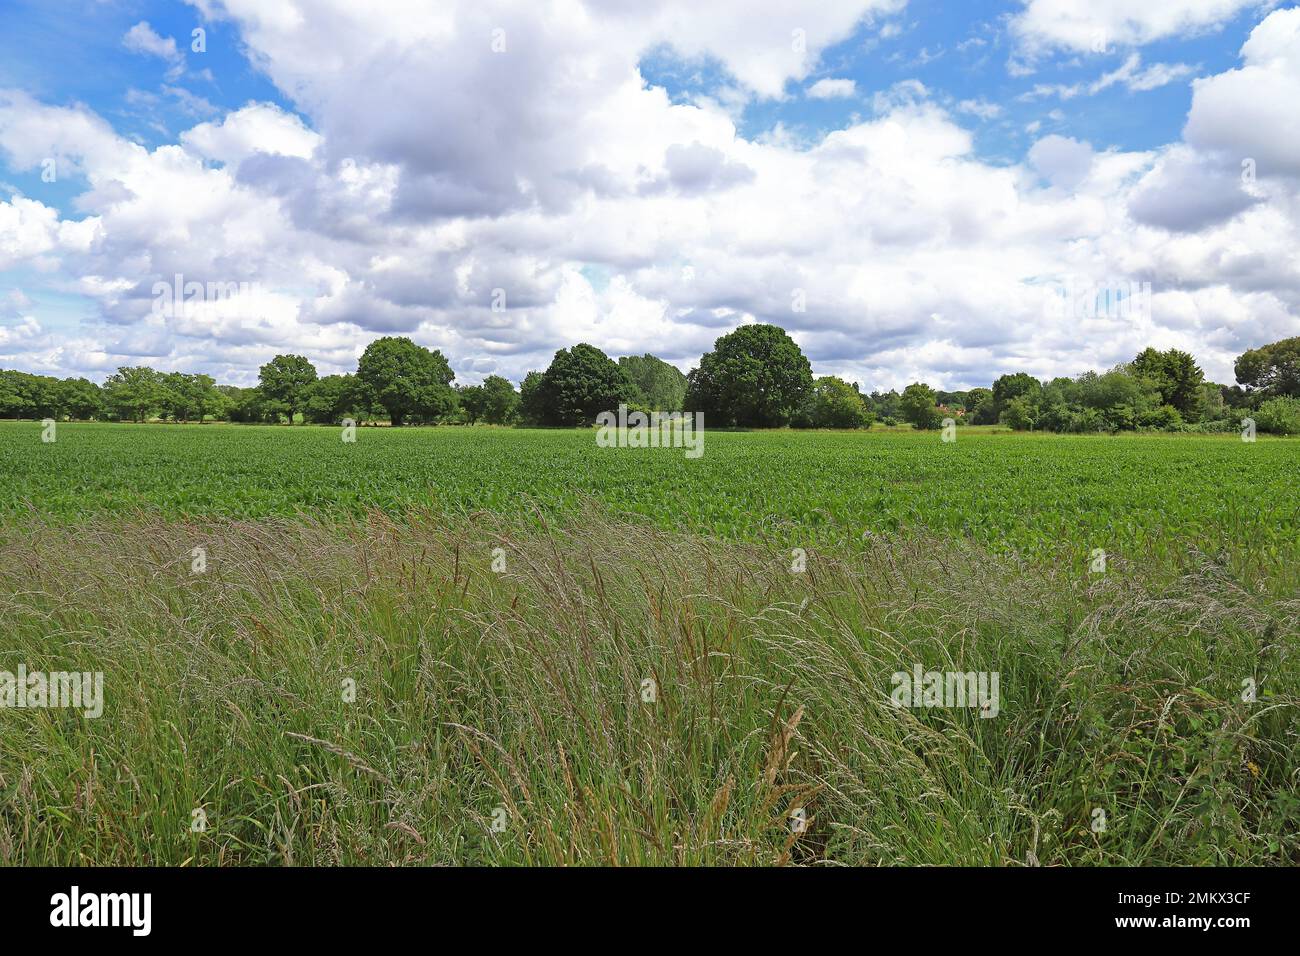 Green crop field lined with trees, with a blue sky with fluffy white clouds Stock Photo